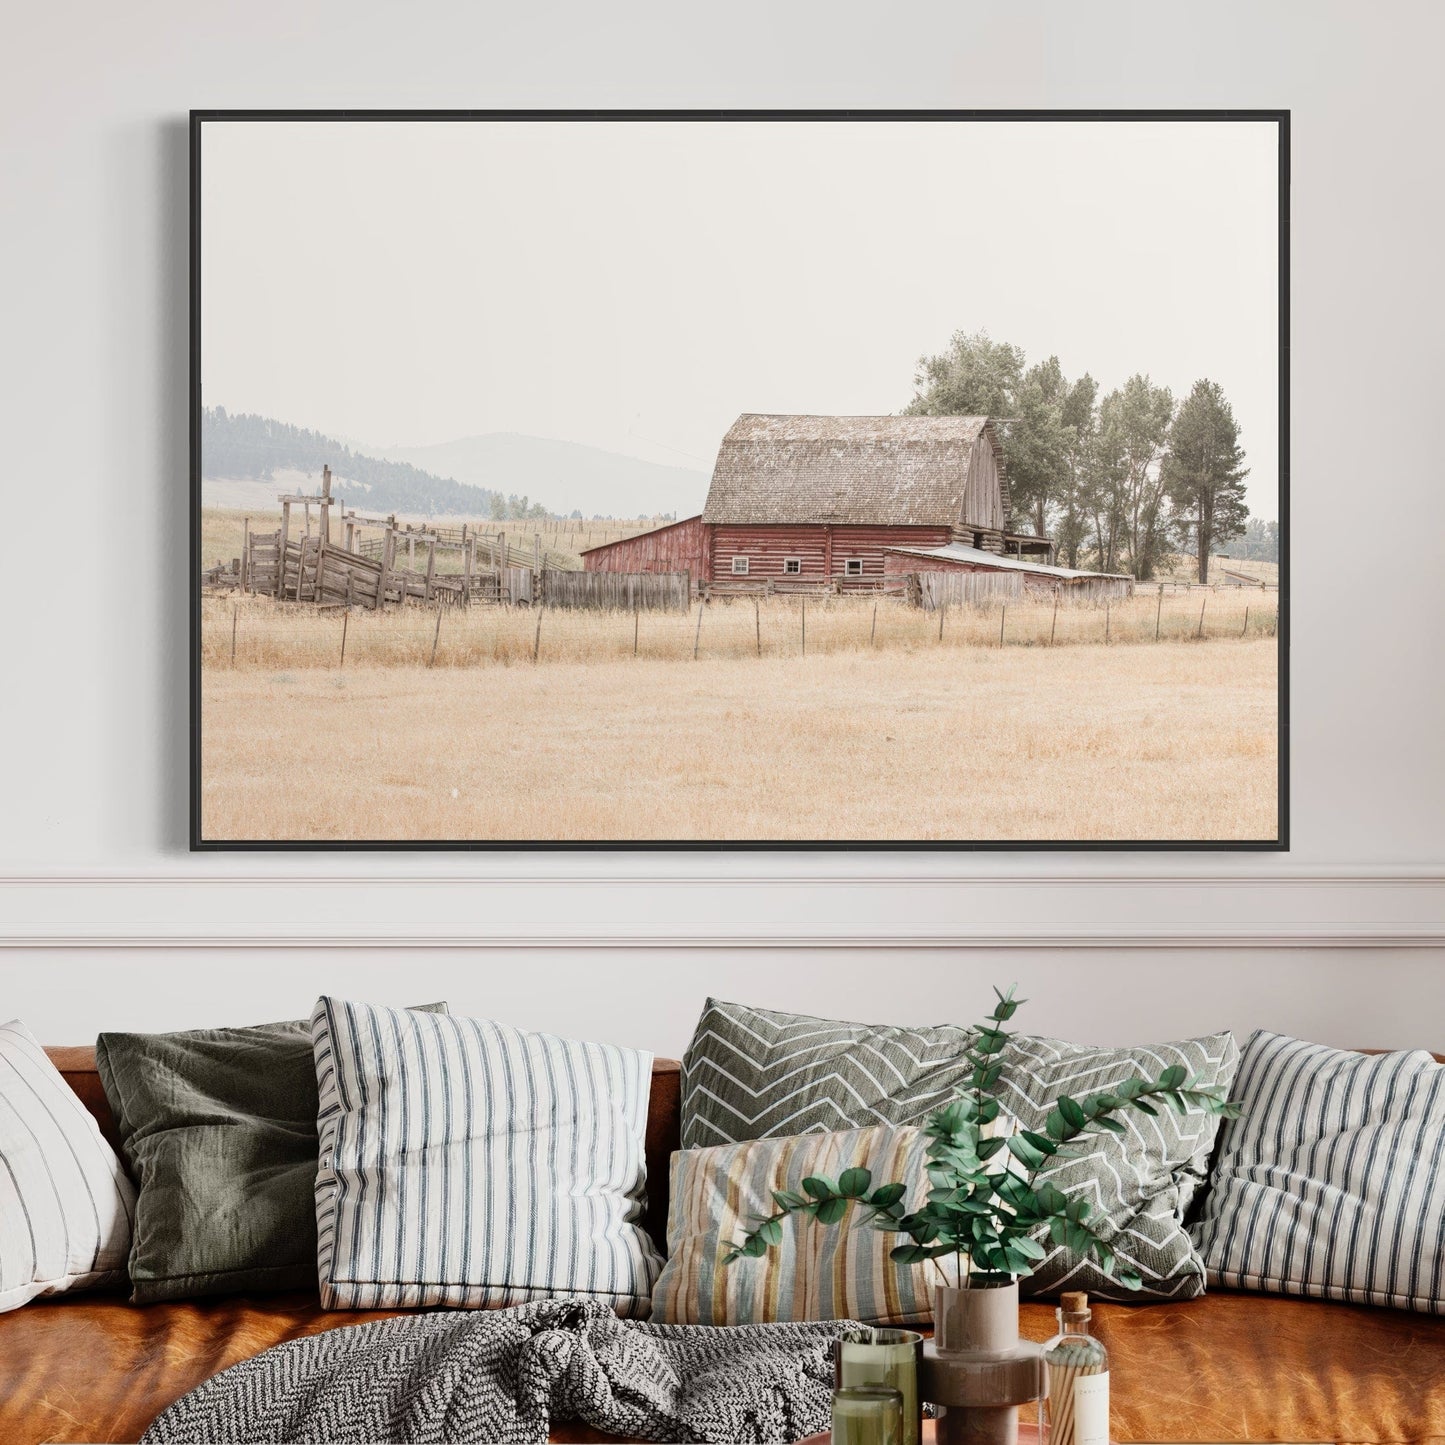 Rustic Dining Room Decor - Old Red Barn Wall Art Teri James Photography